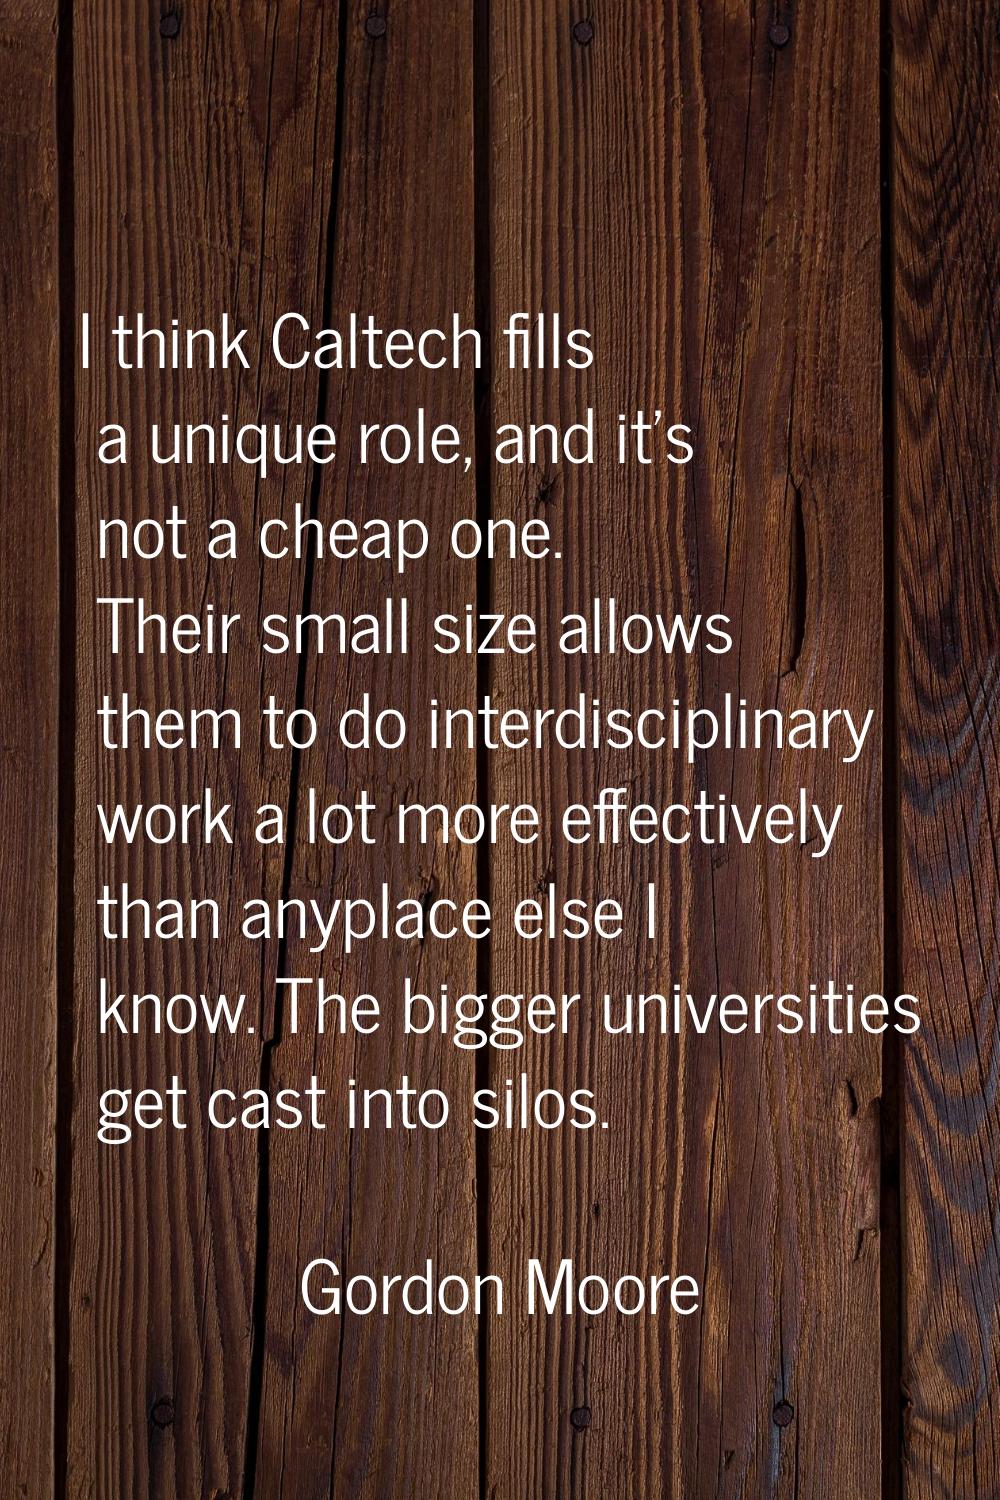 I think Caltech fills a unique role, and it's not a cheap one. Their small size allows them to do i